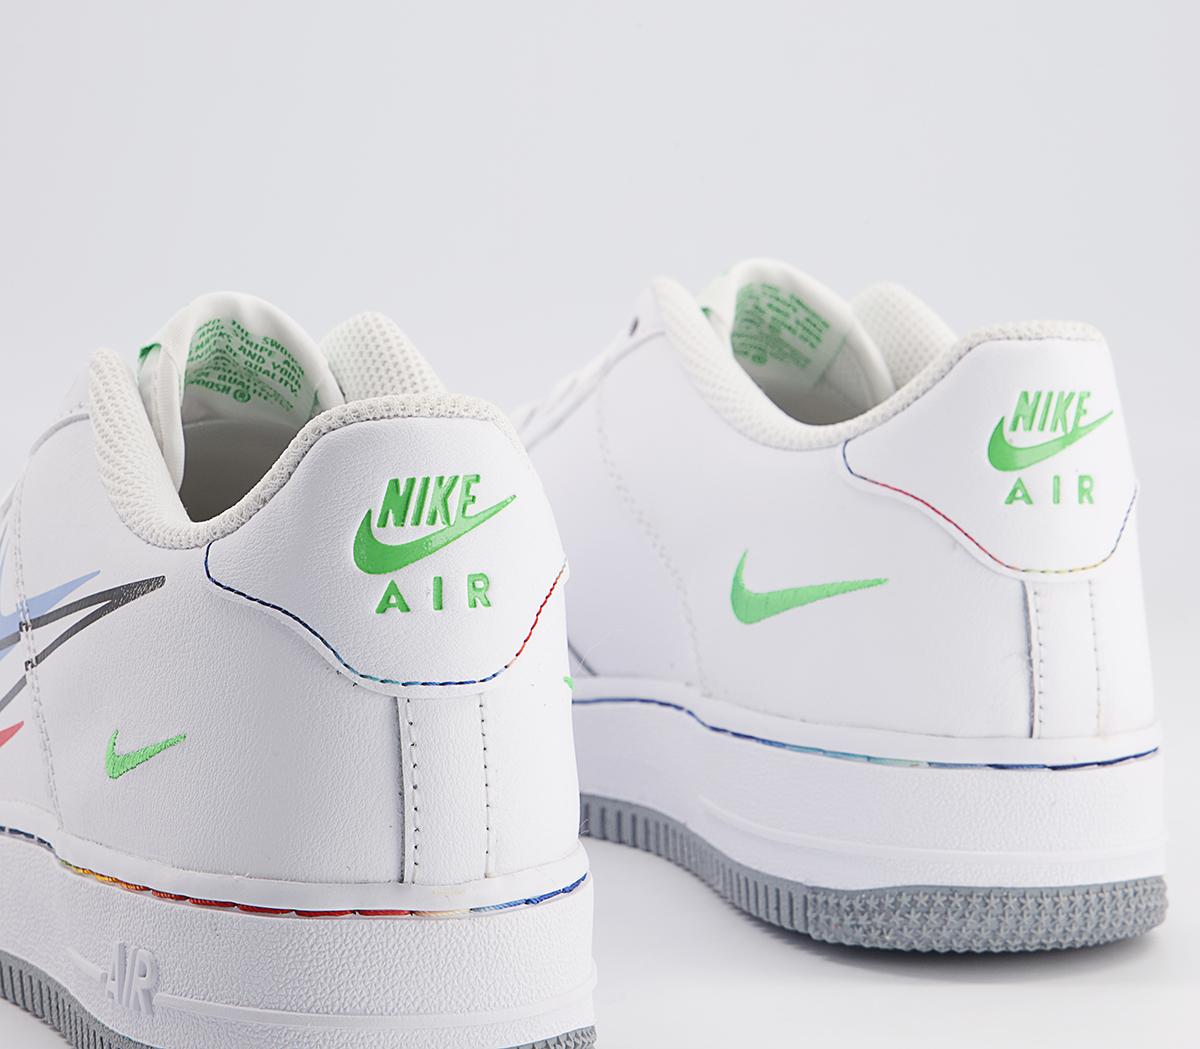 Nike Af1 Boys Trainers White Green Spark Aluminum Black - Women's Trainers